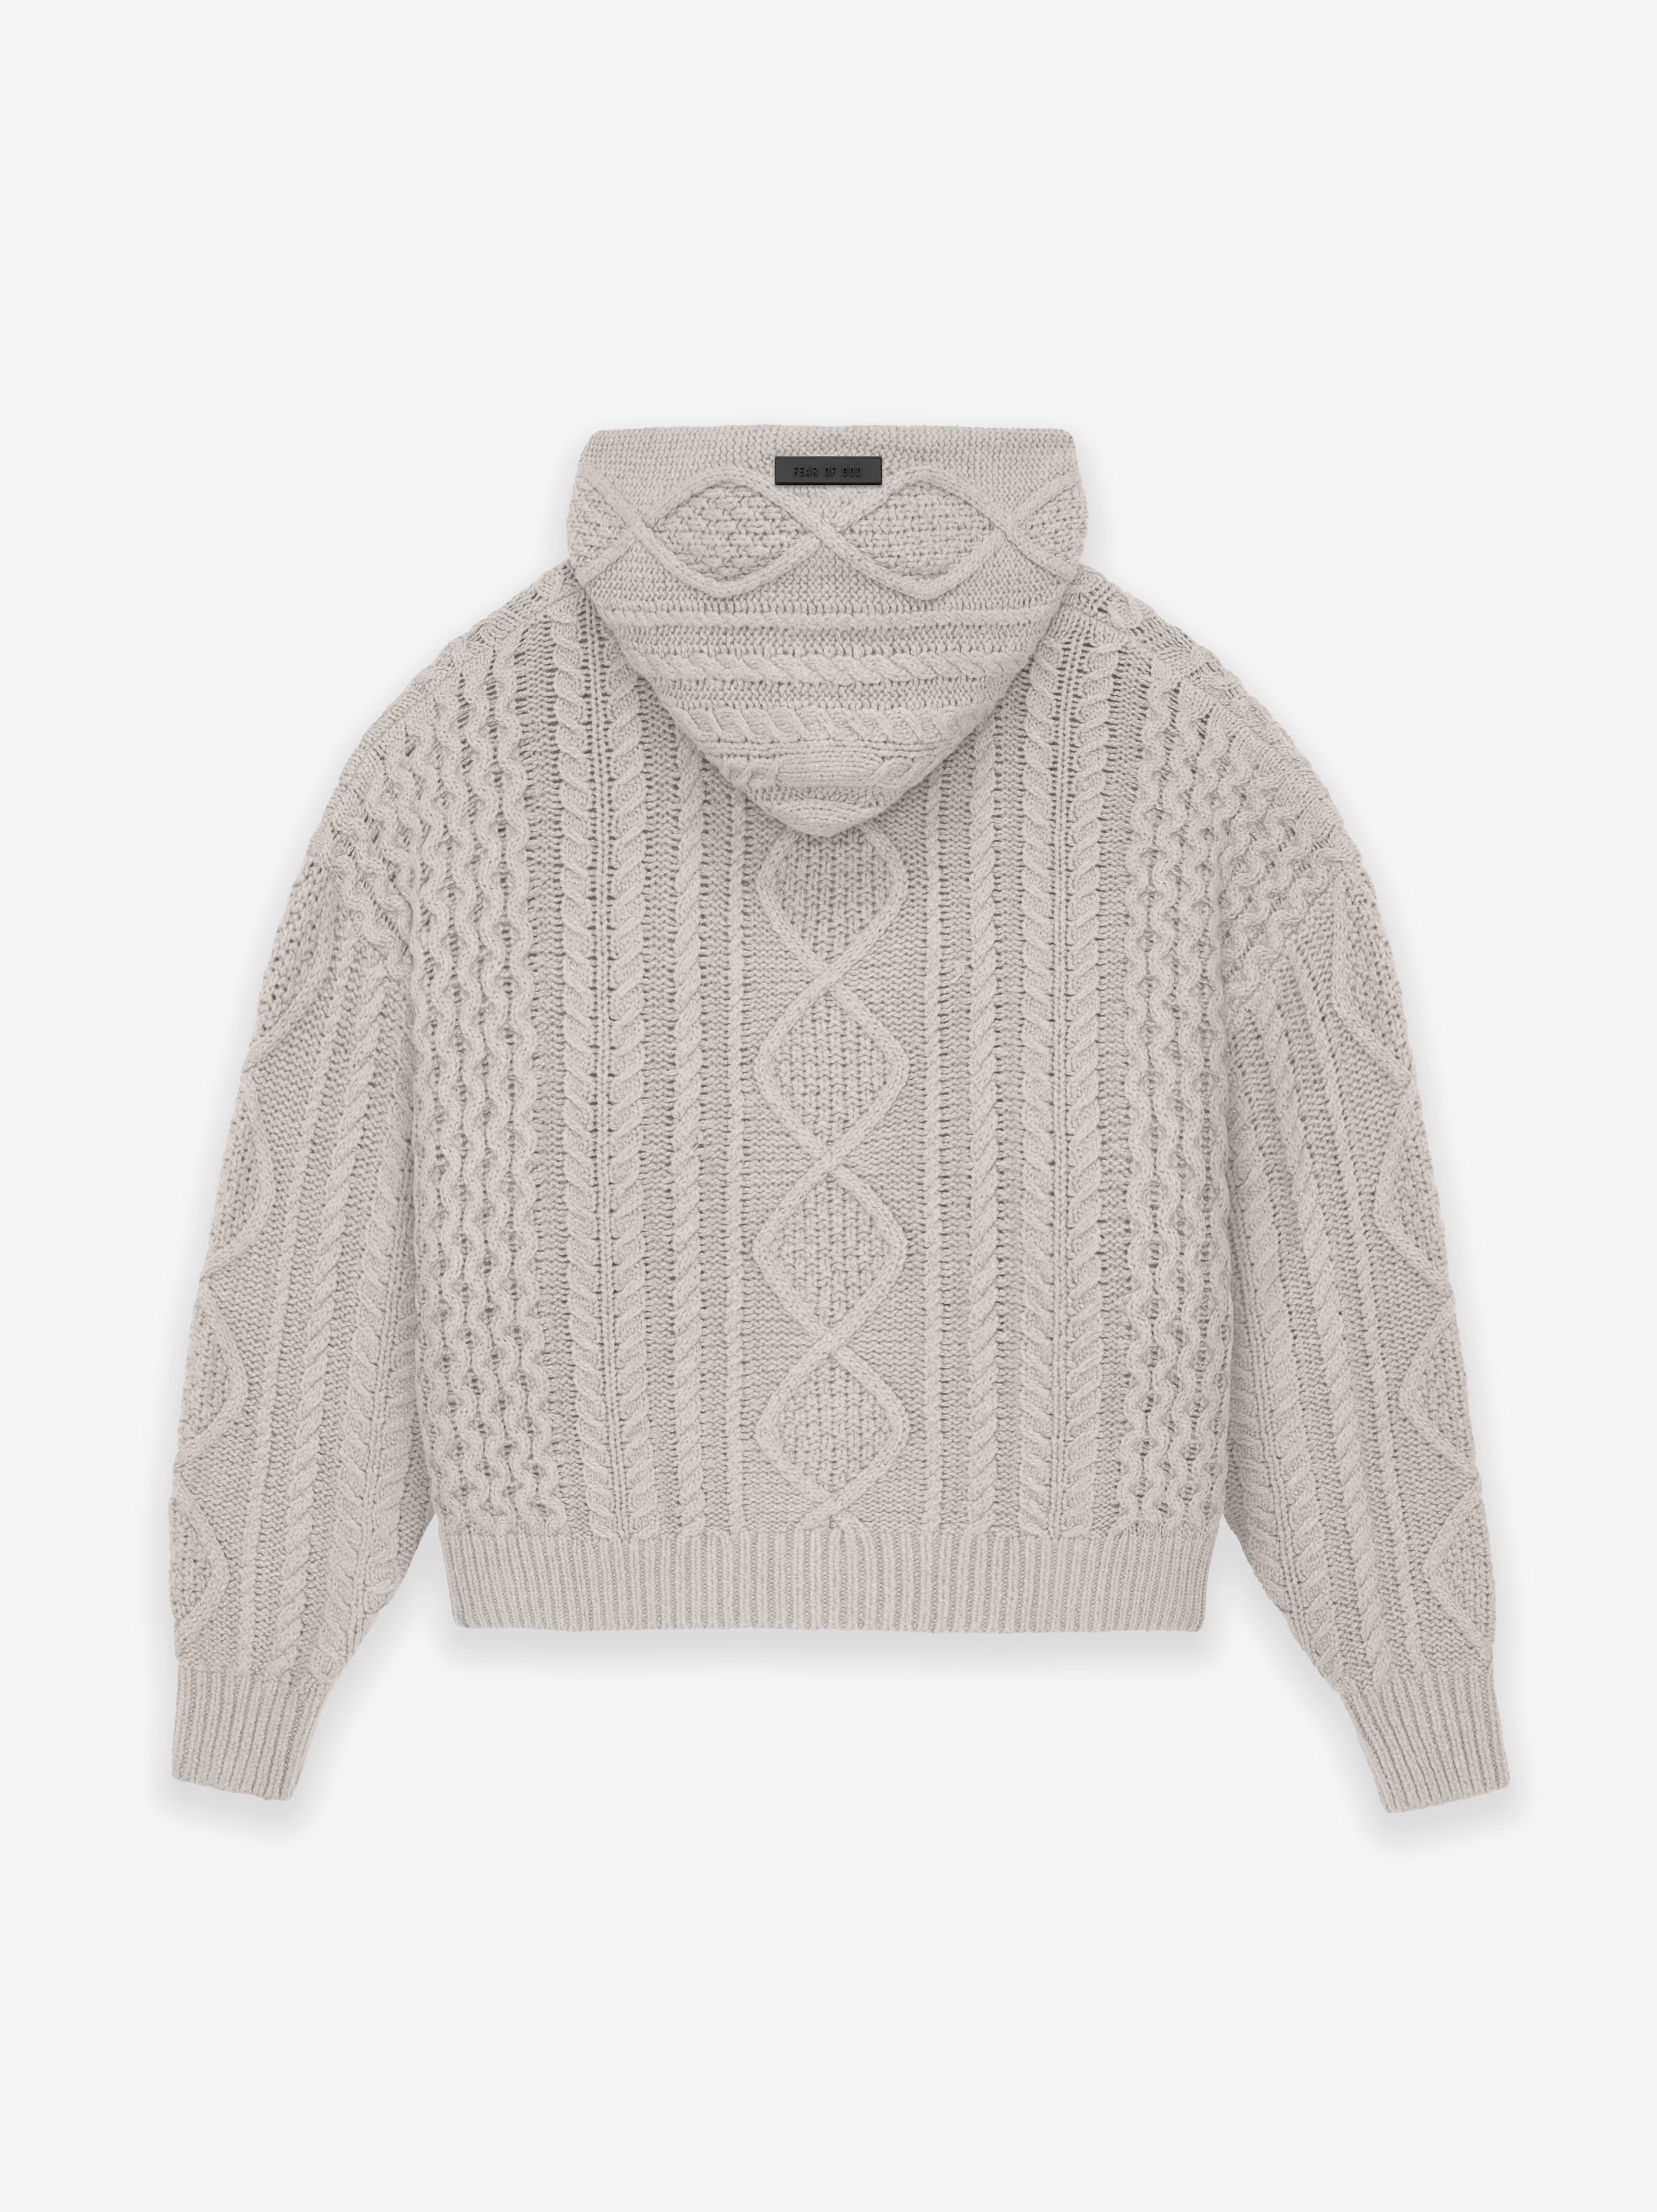 Fear of God Essentials Knit Hoodie - Buttercream (SS21) - Im Your